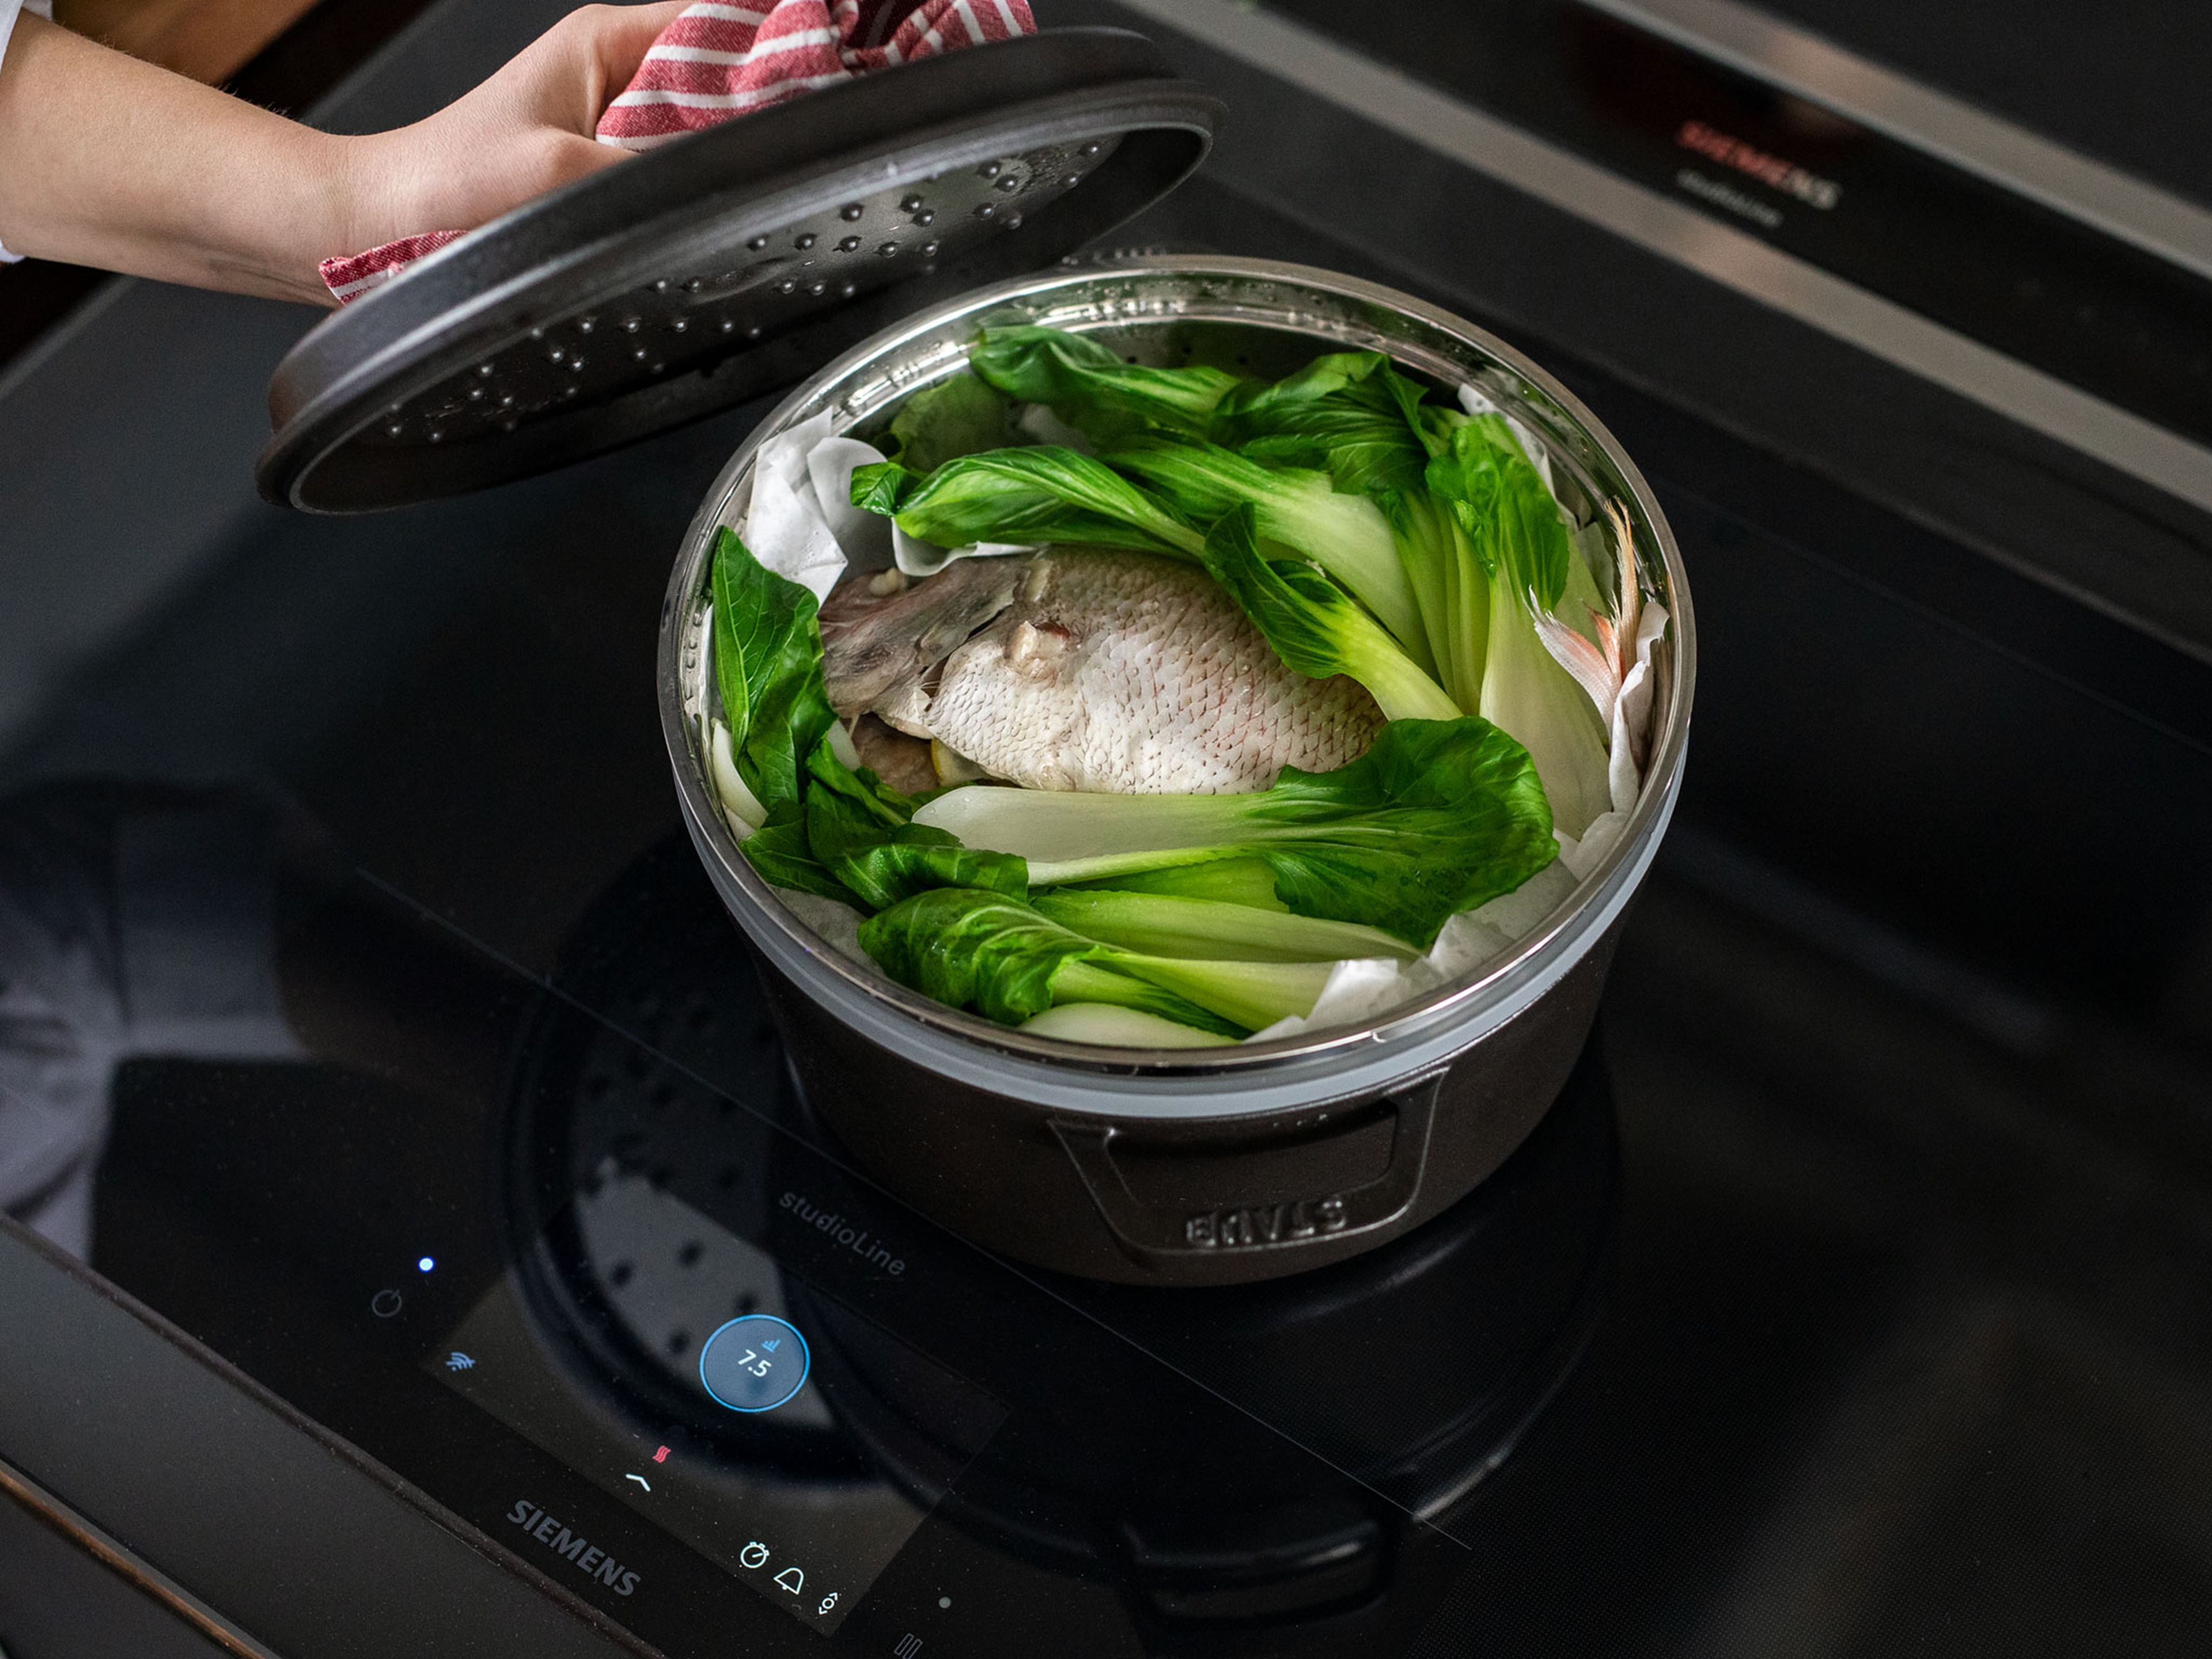 Line a steamer basket with baking paper. Put the fish in the steamer basket, set over the boiling water to steam. After approx. 5 min, add bok choy leaves to the basket, let steam for approx. 5 min more.